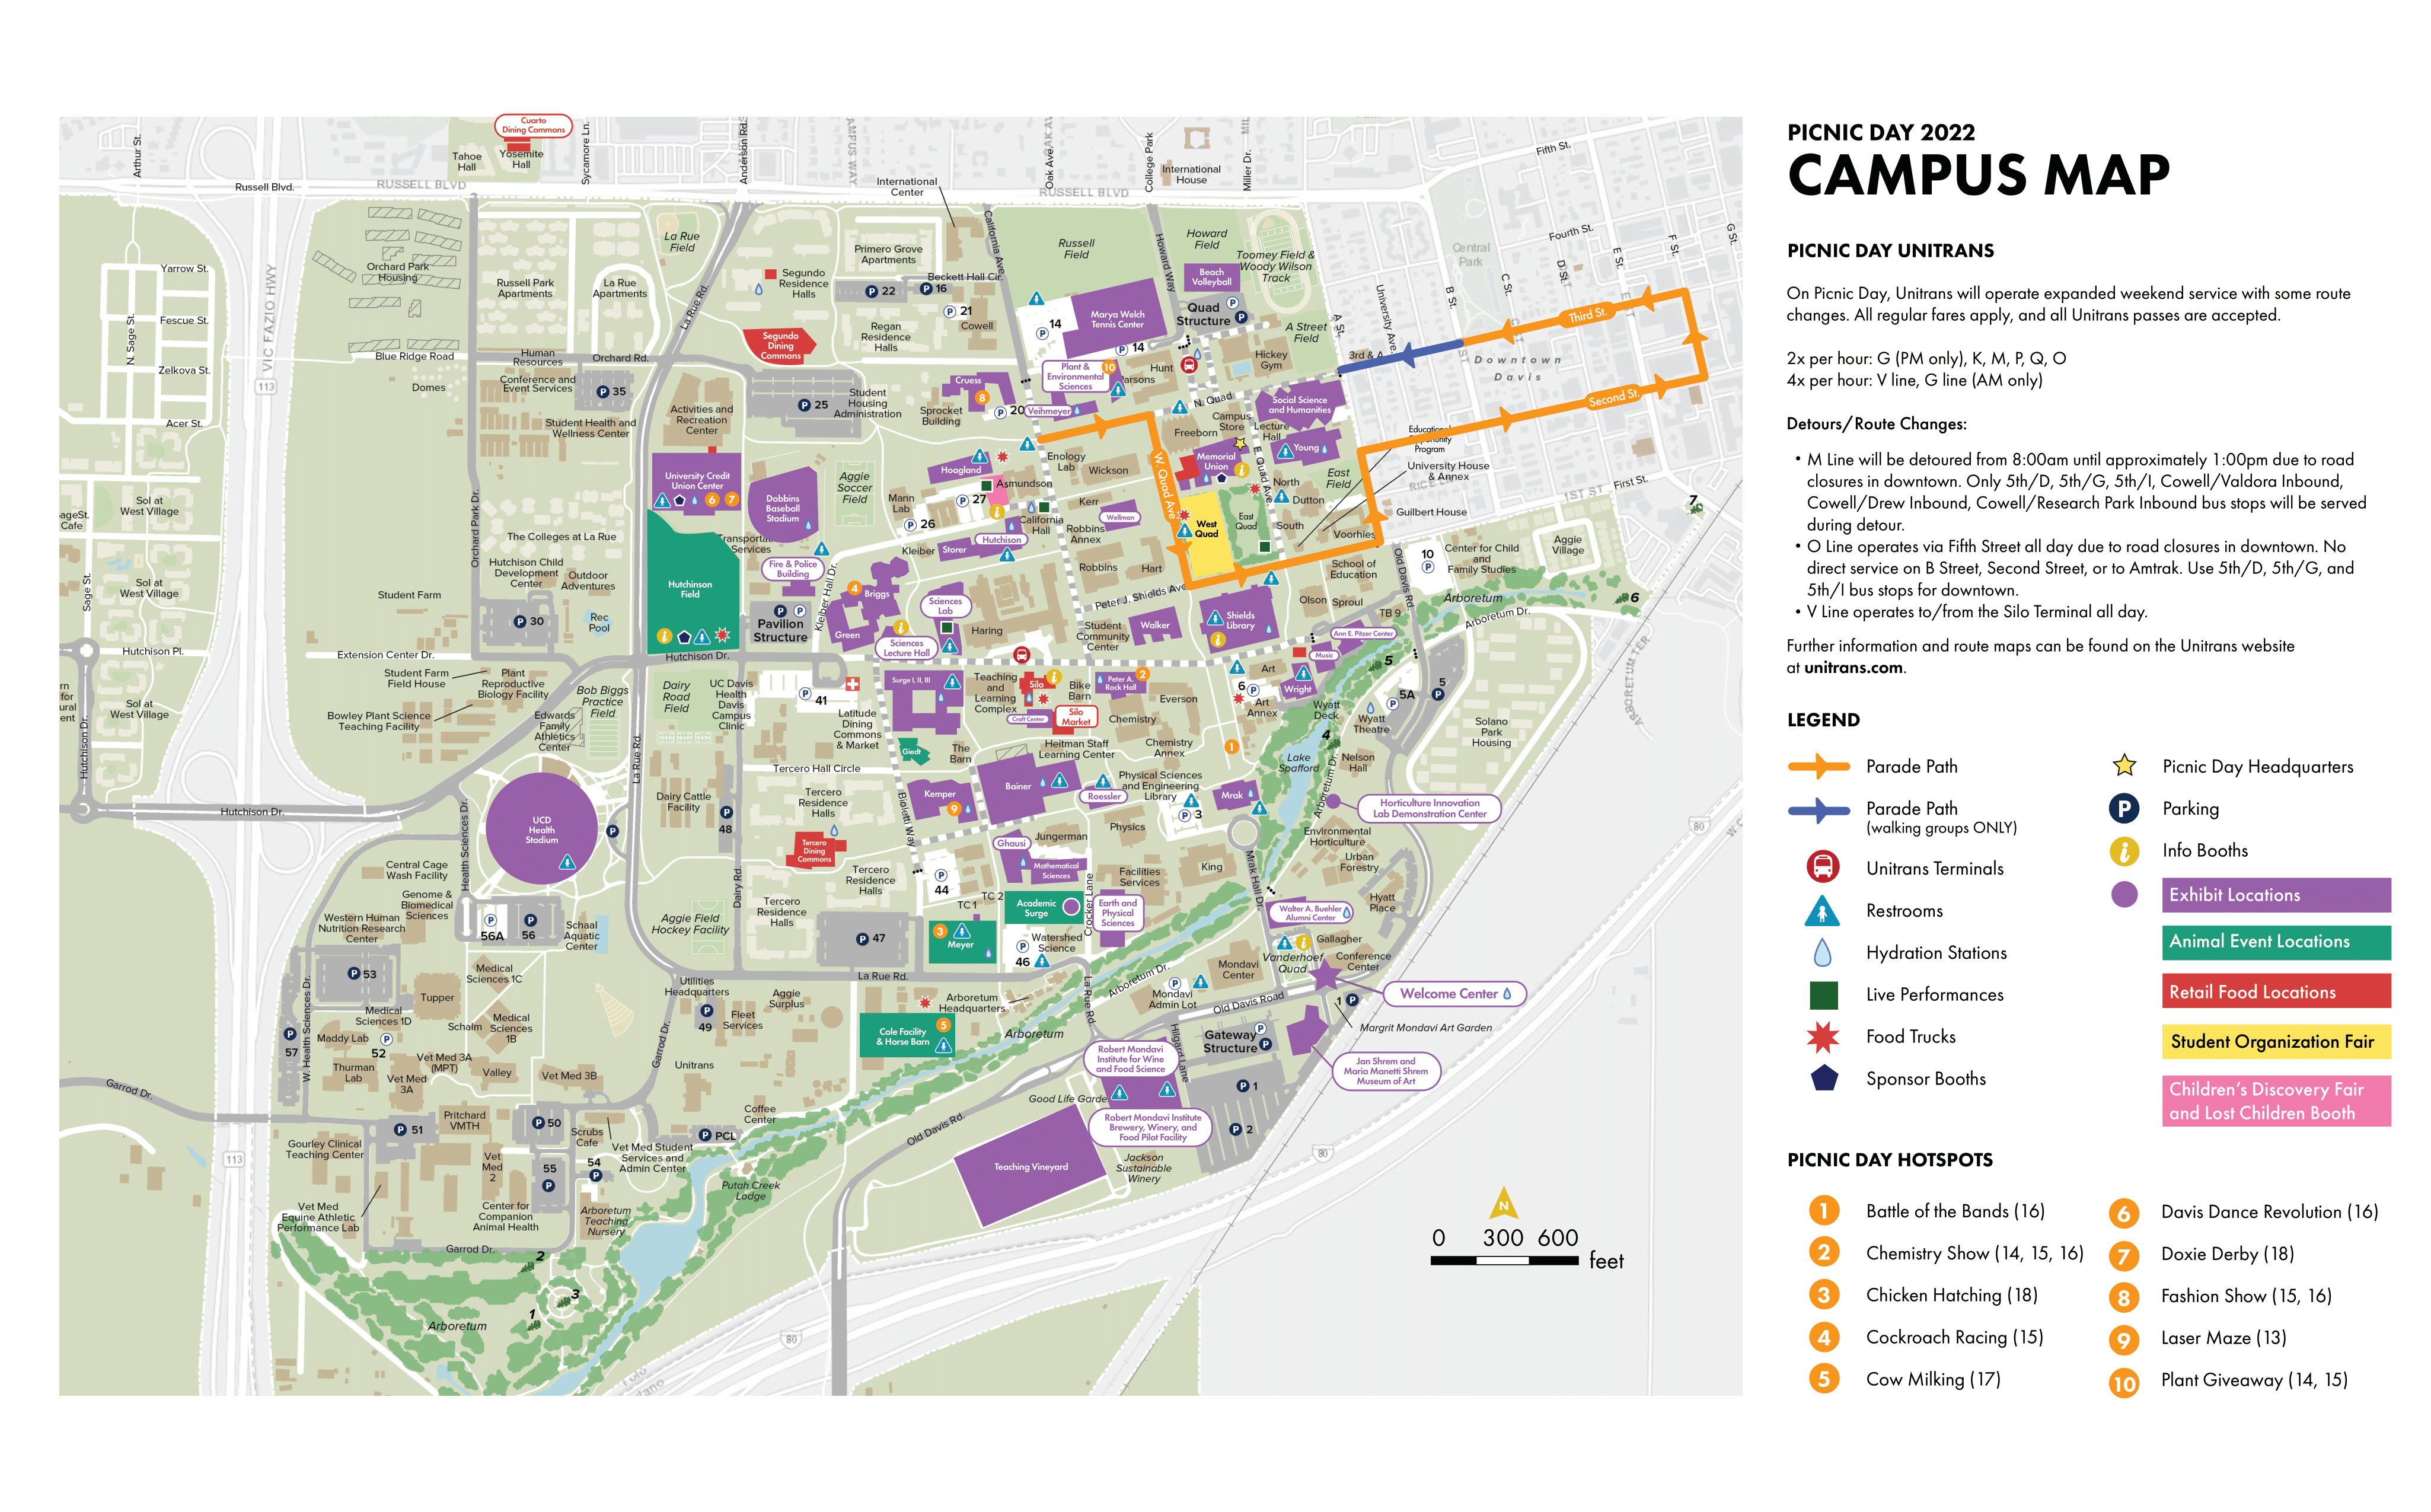 image of the 2022 picnic day map